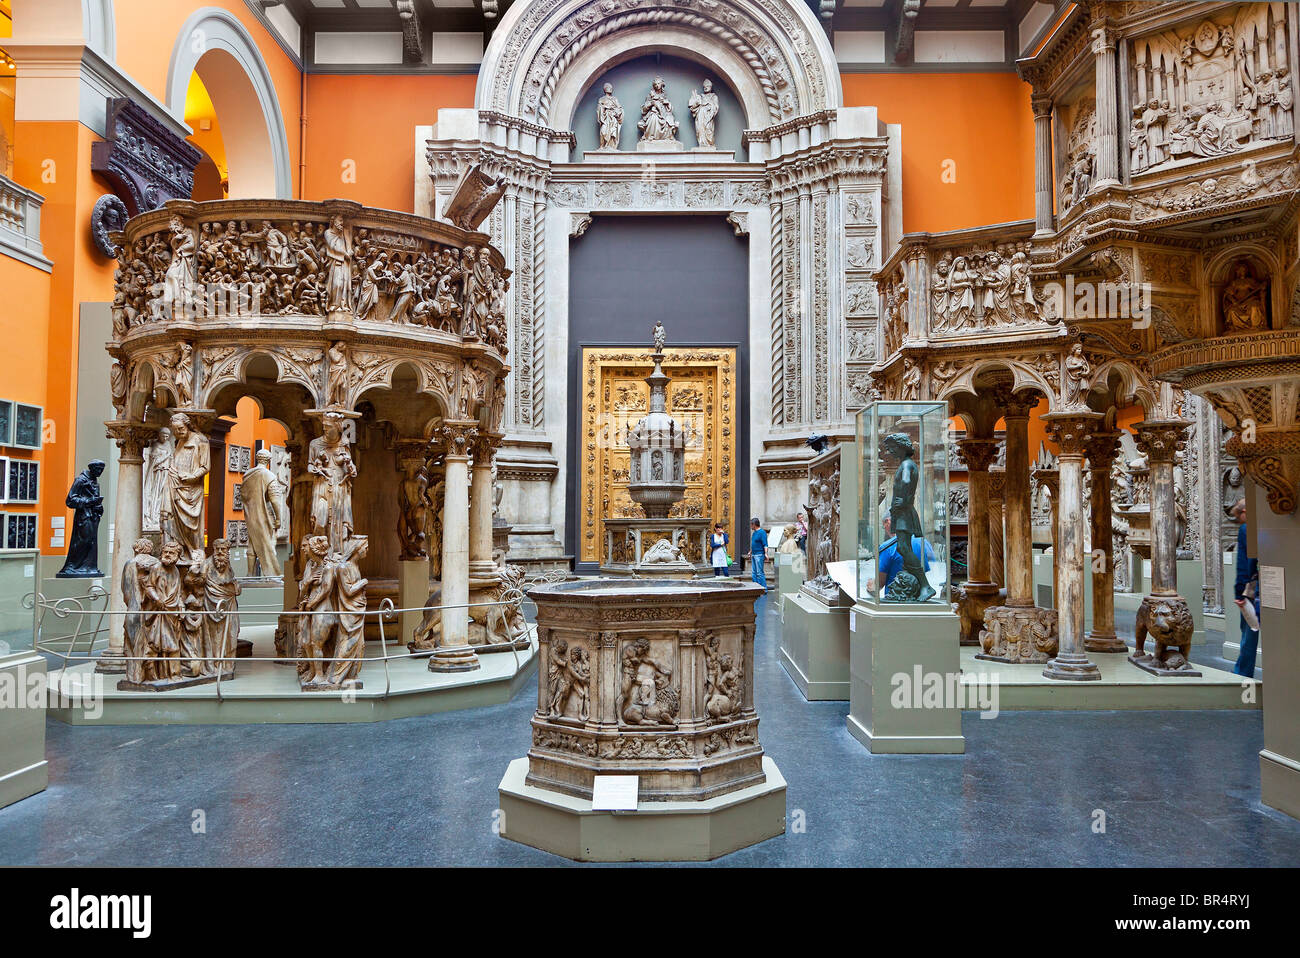 Europe, United Kingdom, England, London, View of the East Cast Court at the Victoria and Albert Museum Stock Photo